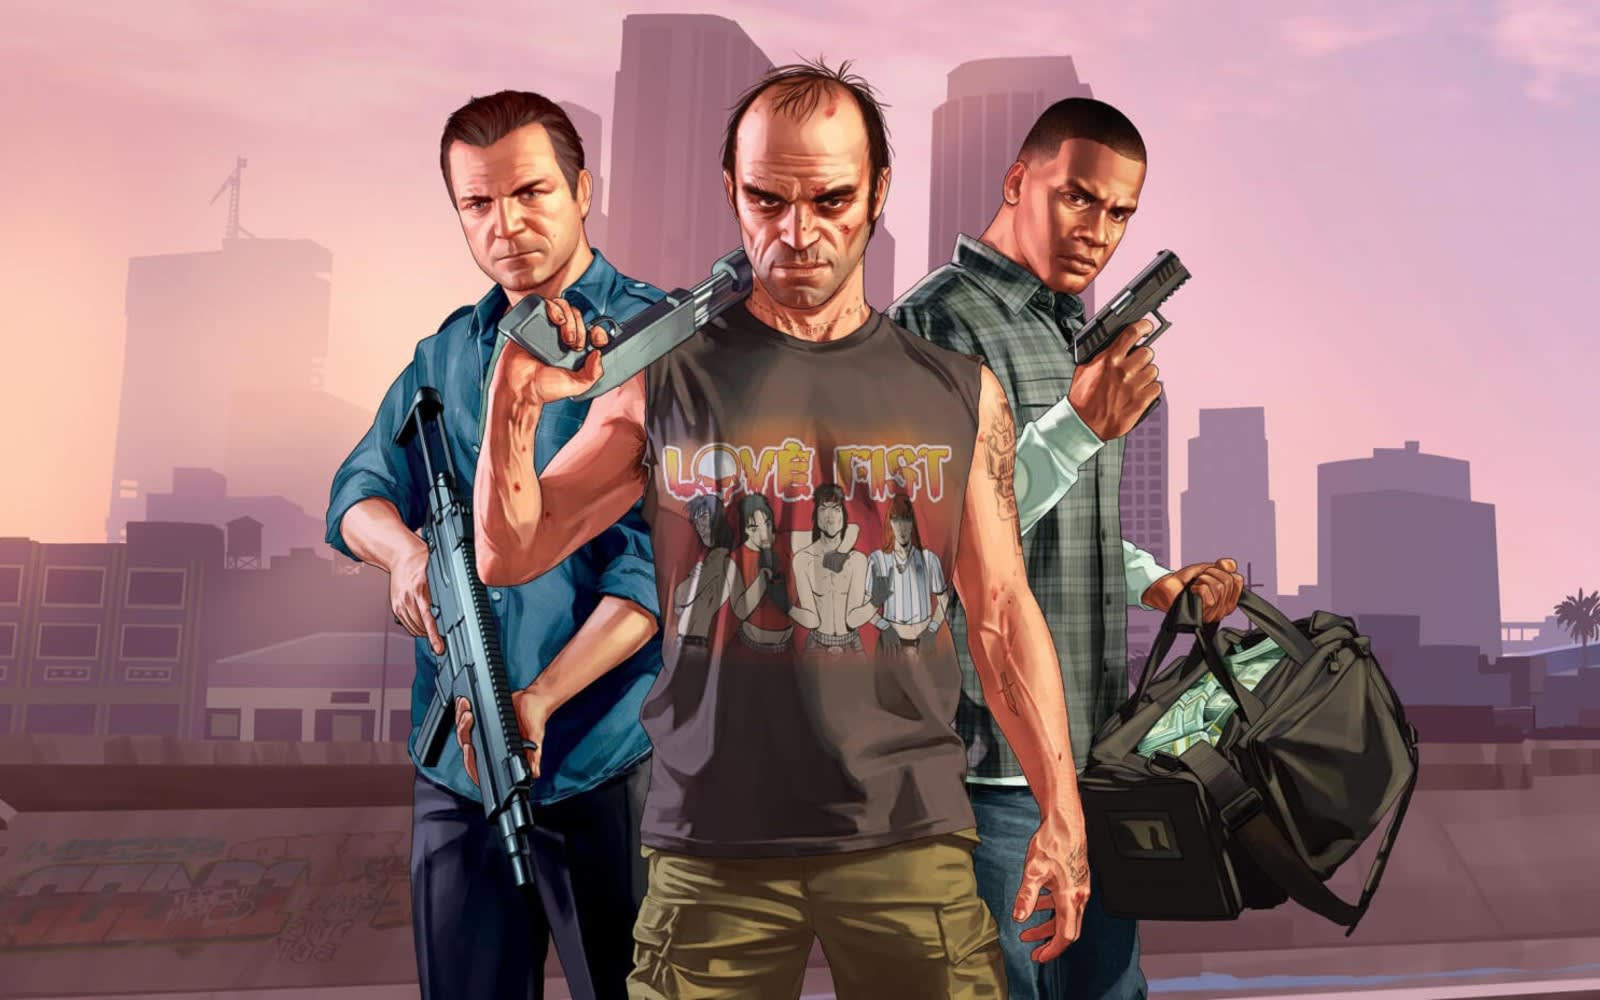 Grand Theft Auto 5 free of charge!